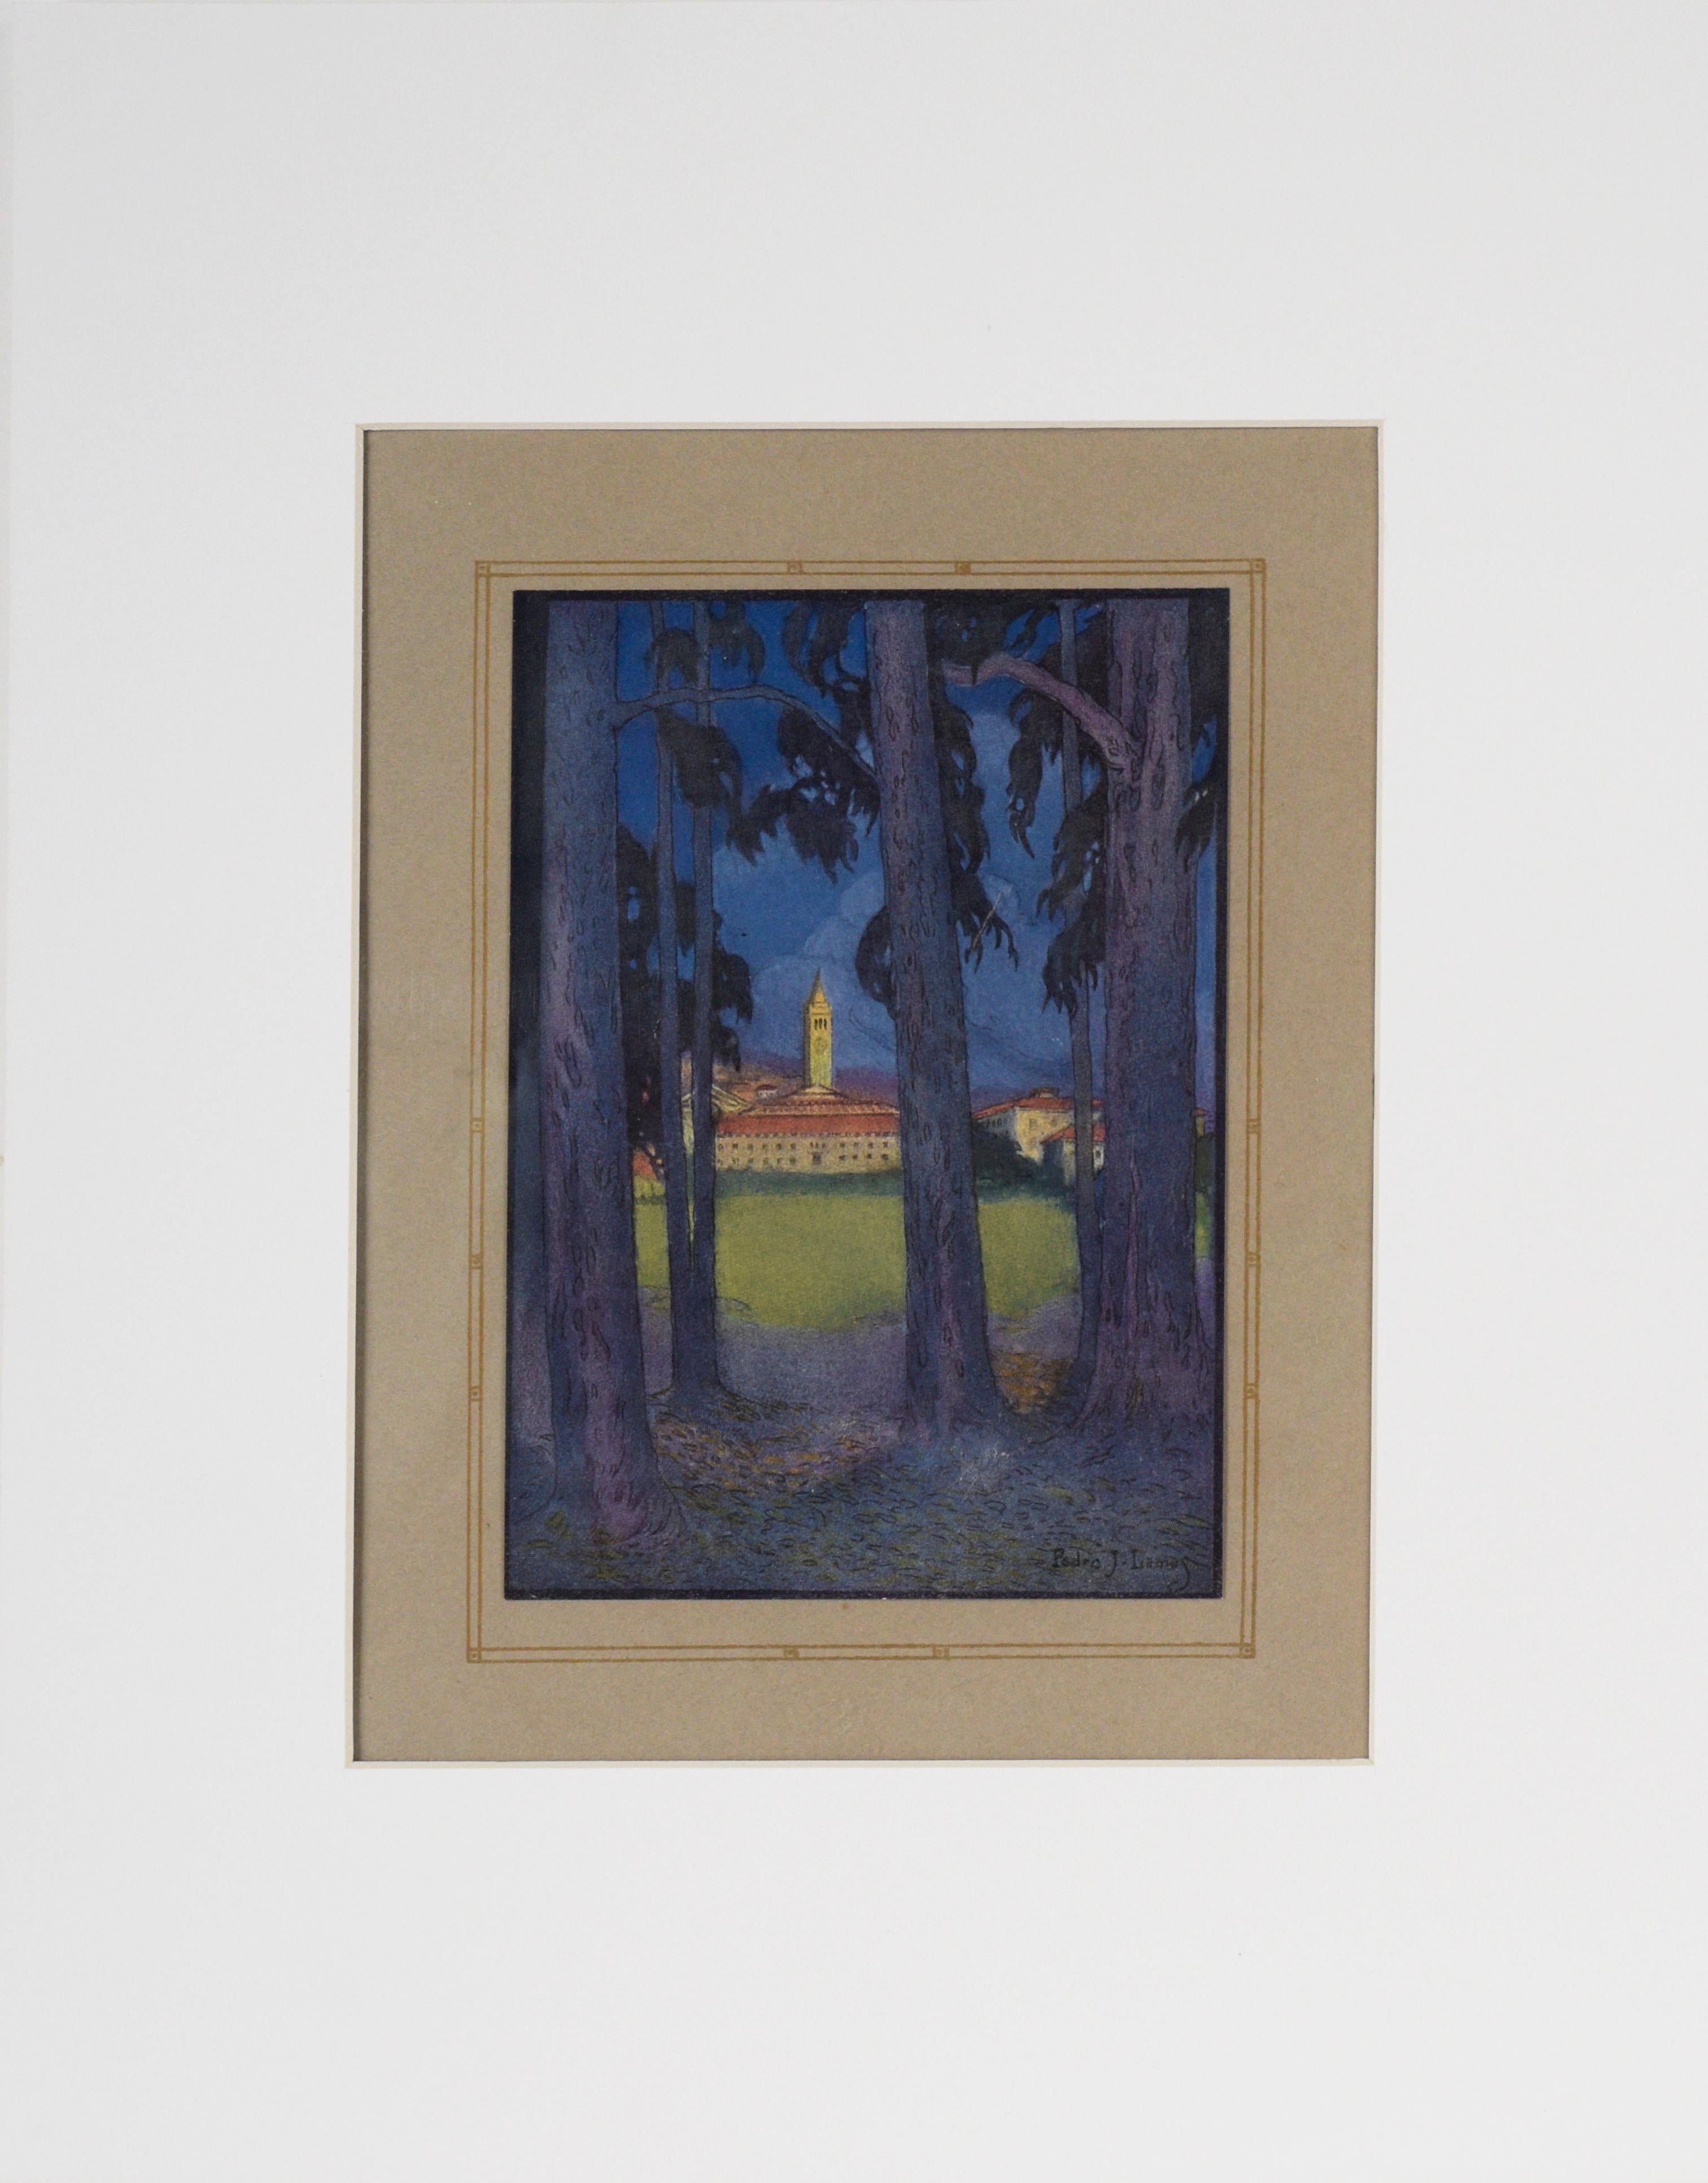 Pedro Lemos Landscape Print - "The Greater University" - 1921 UC Berkeley Yearbook Color Lithograph